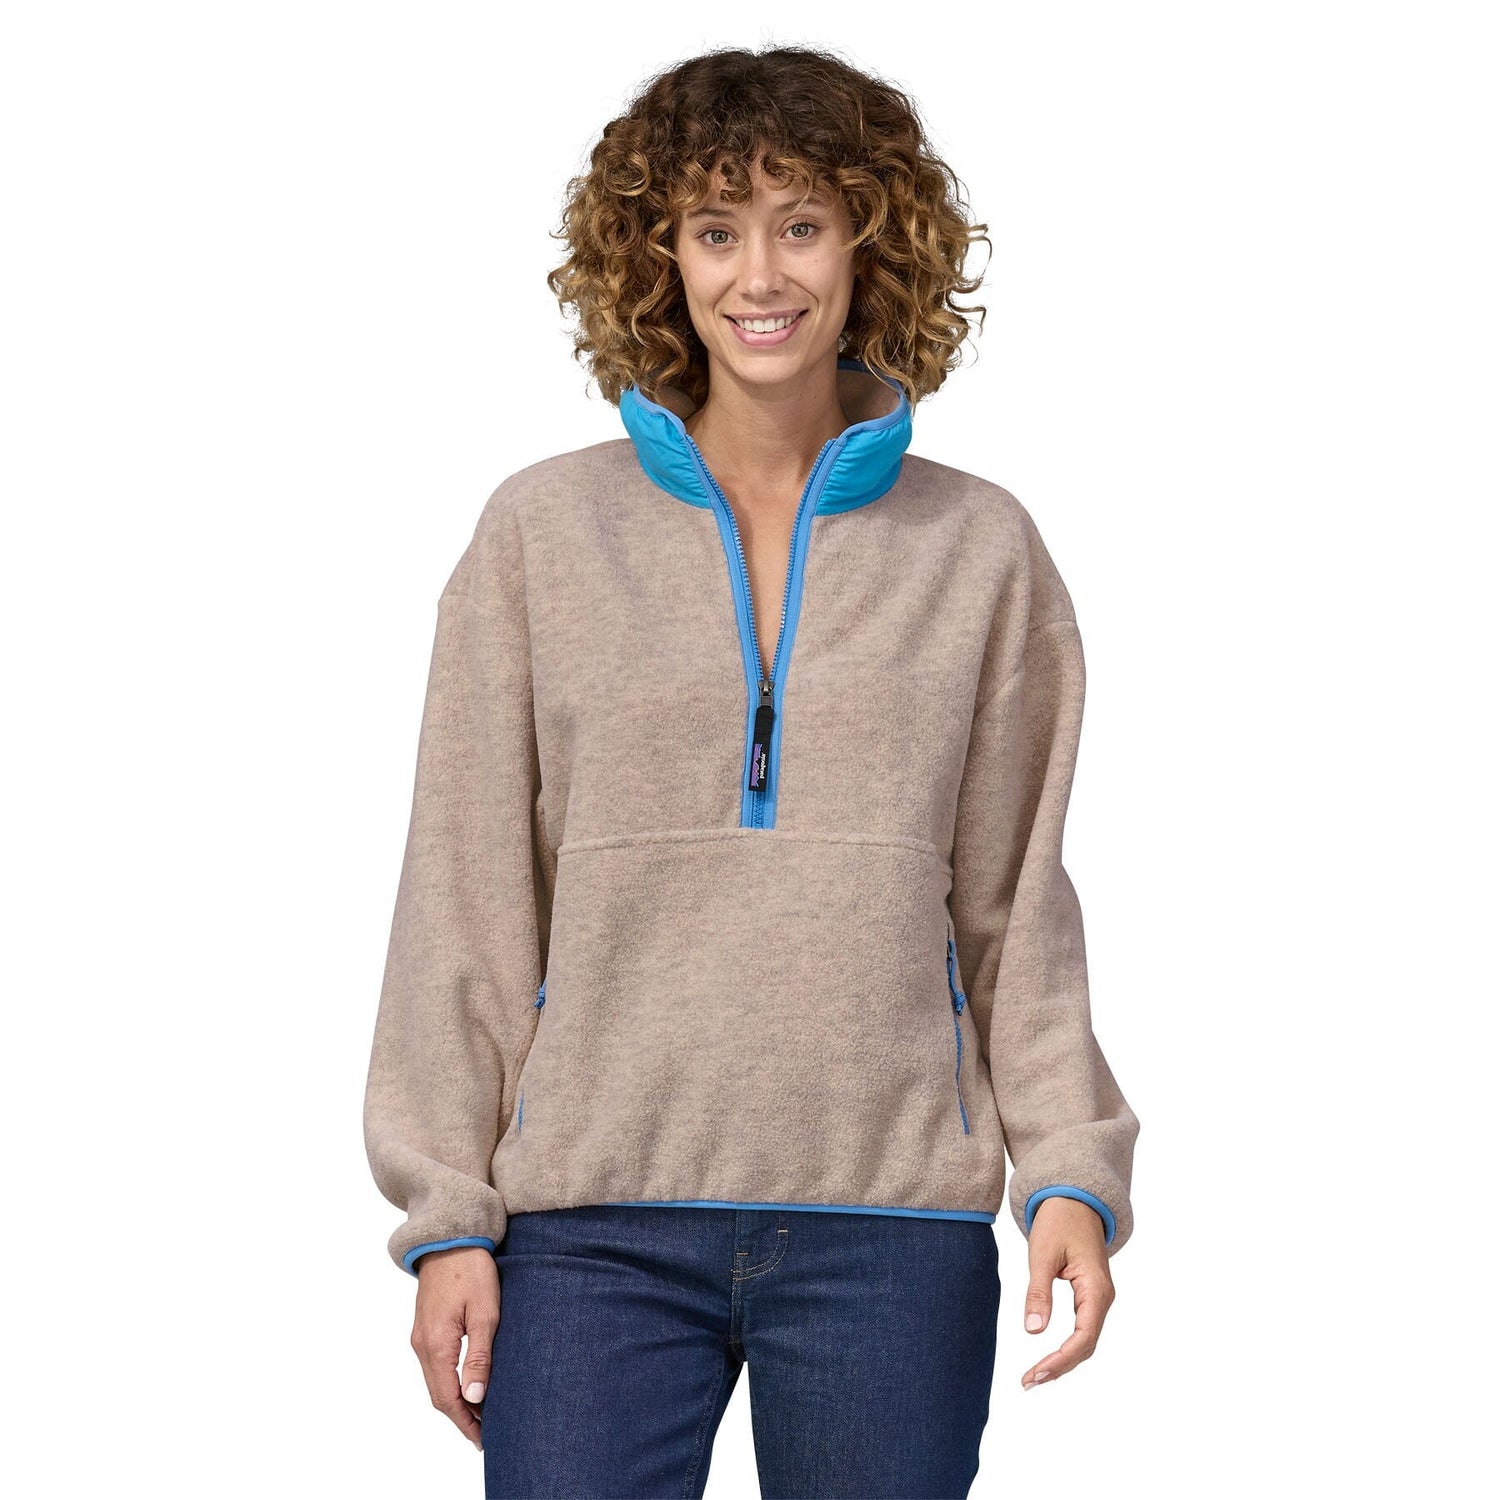 Patagonia W's Synch Fleece Marsupial - 100% Recycled Polyester Oatmeal Heather w Blue Bird Shirt